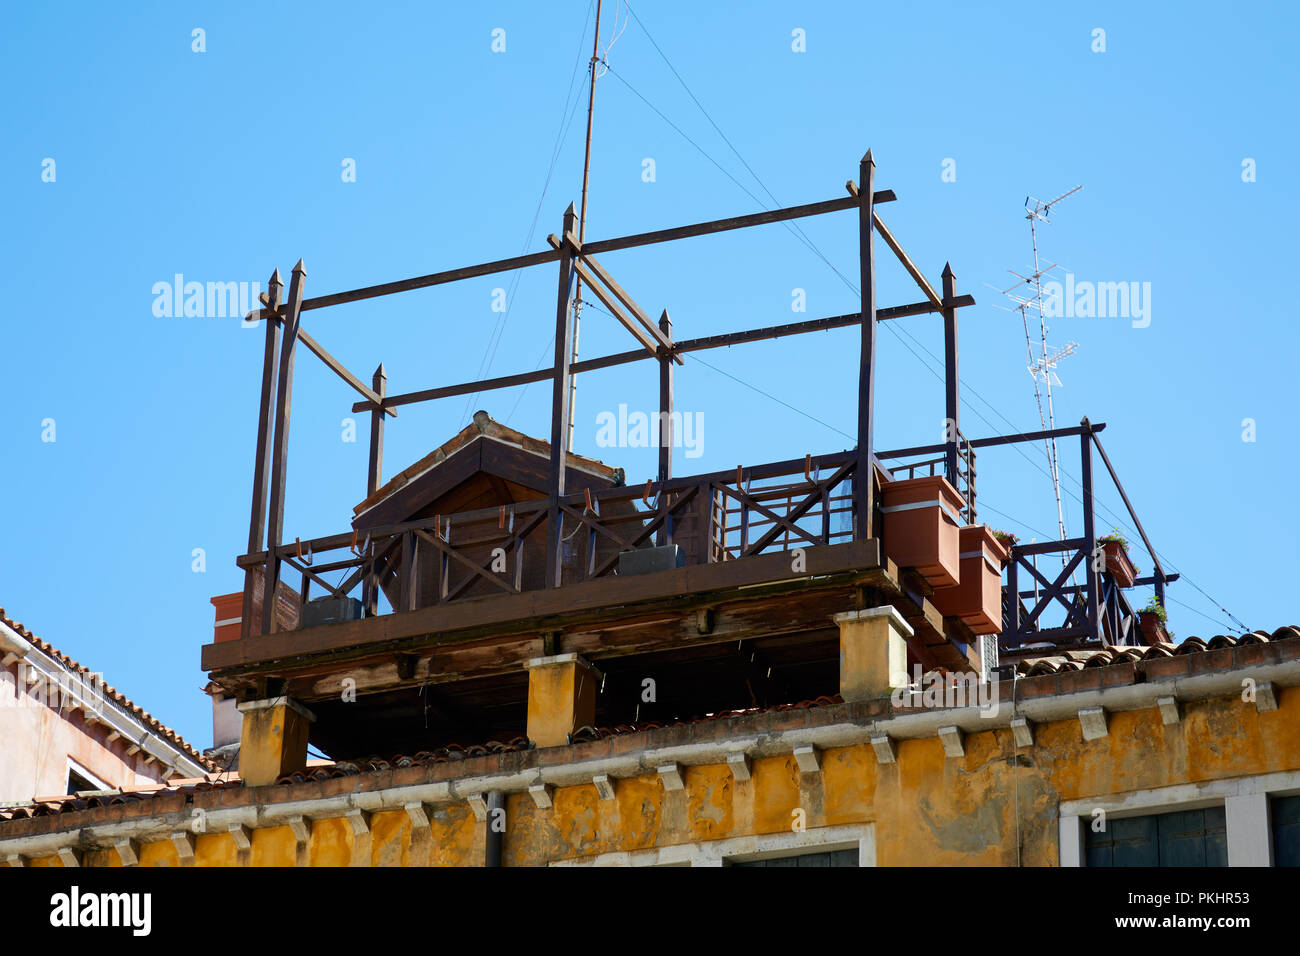 VENICE, ITALY - AUGUST 13, 2017: Typical altana wooden balcony on Venice roof in a sunny summer day in Italy Stock Photo